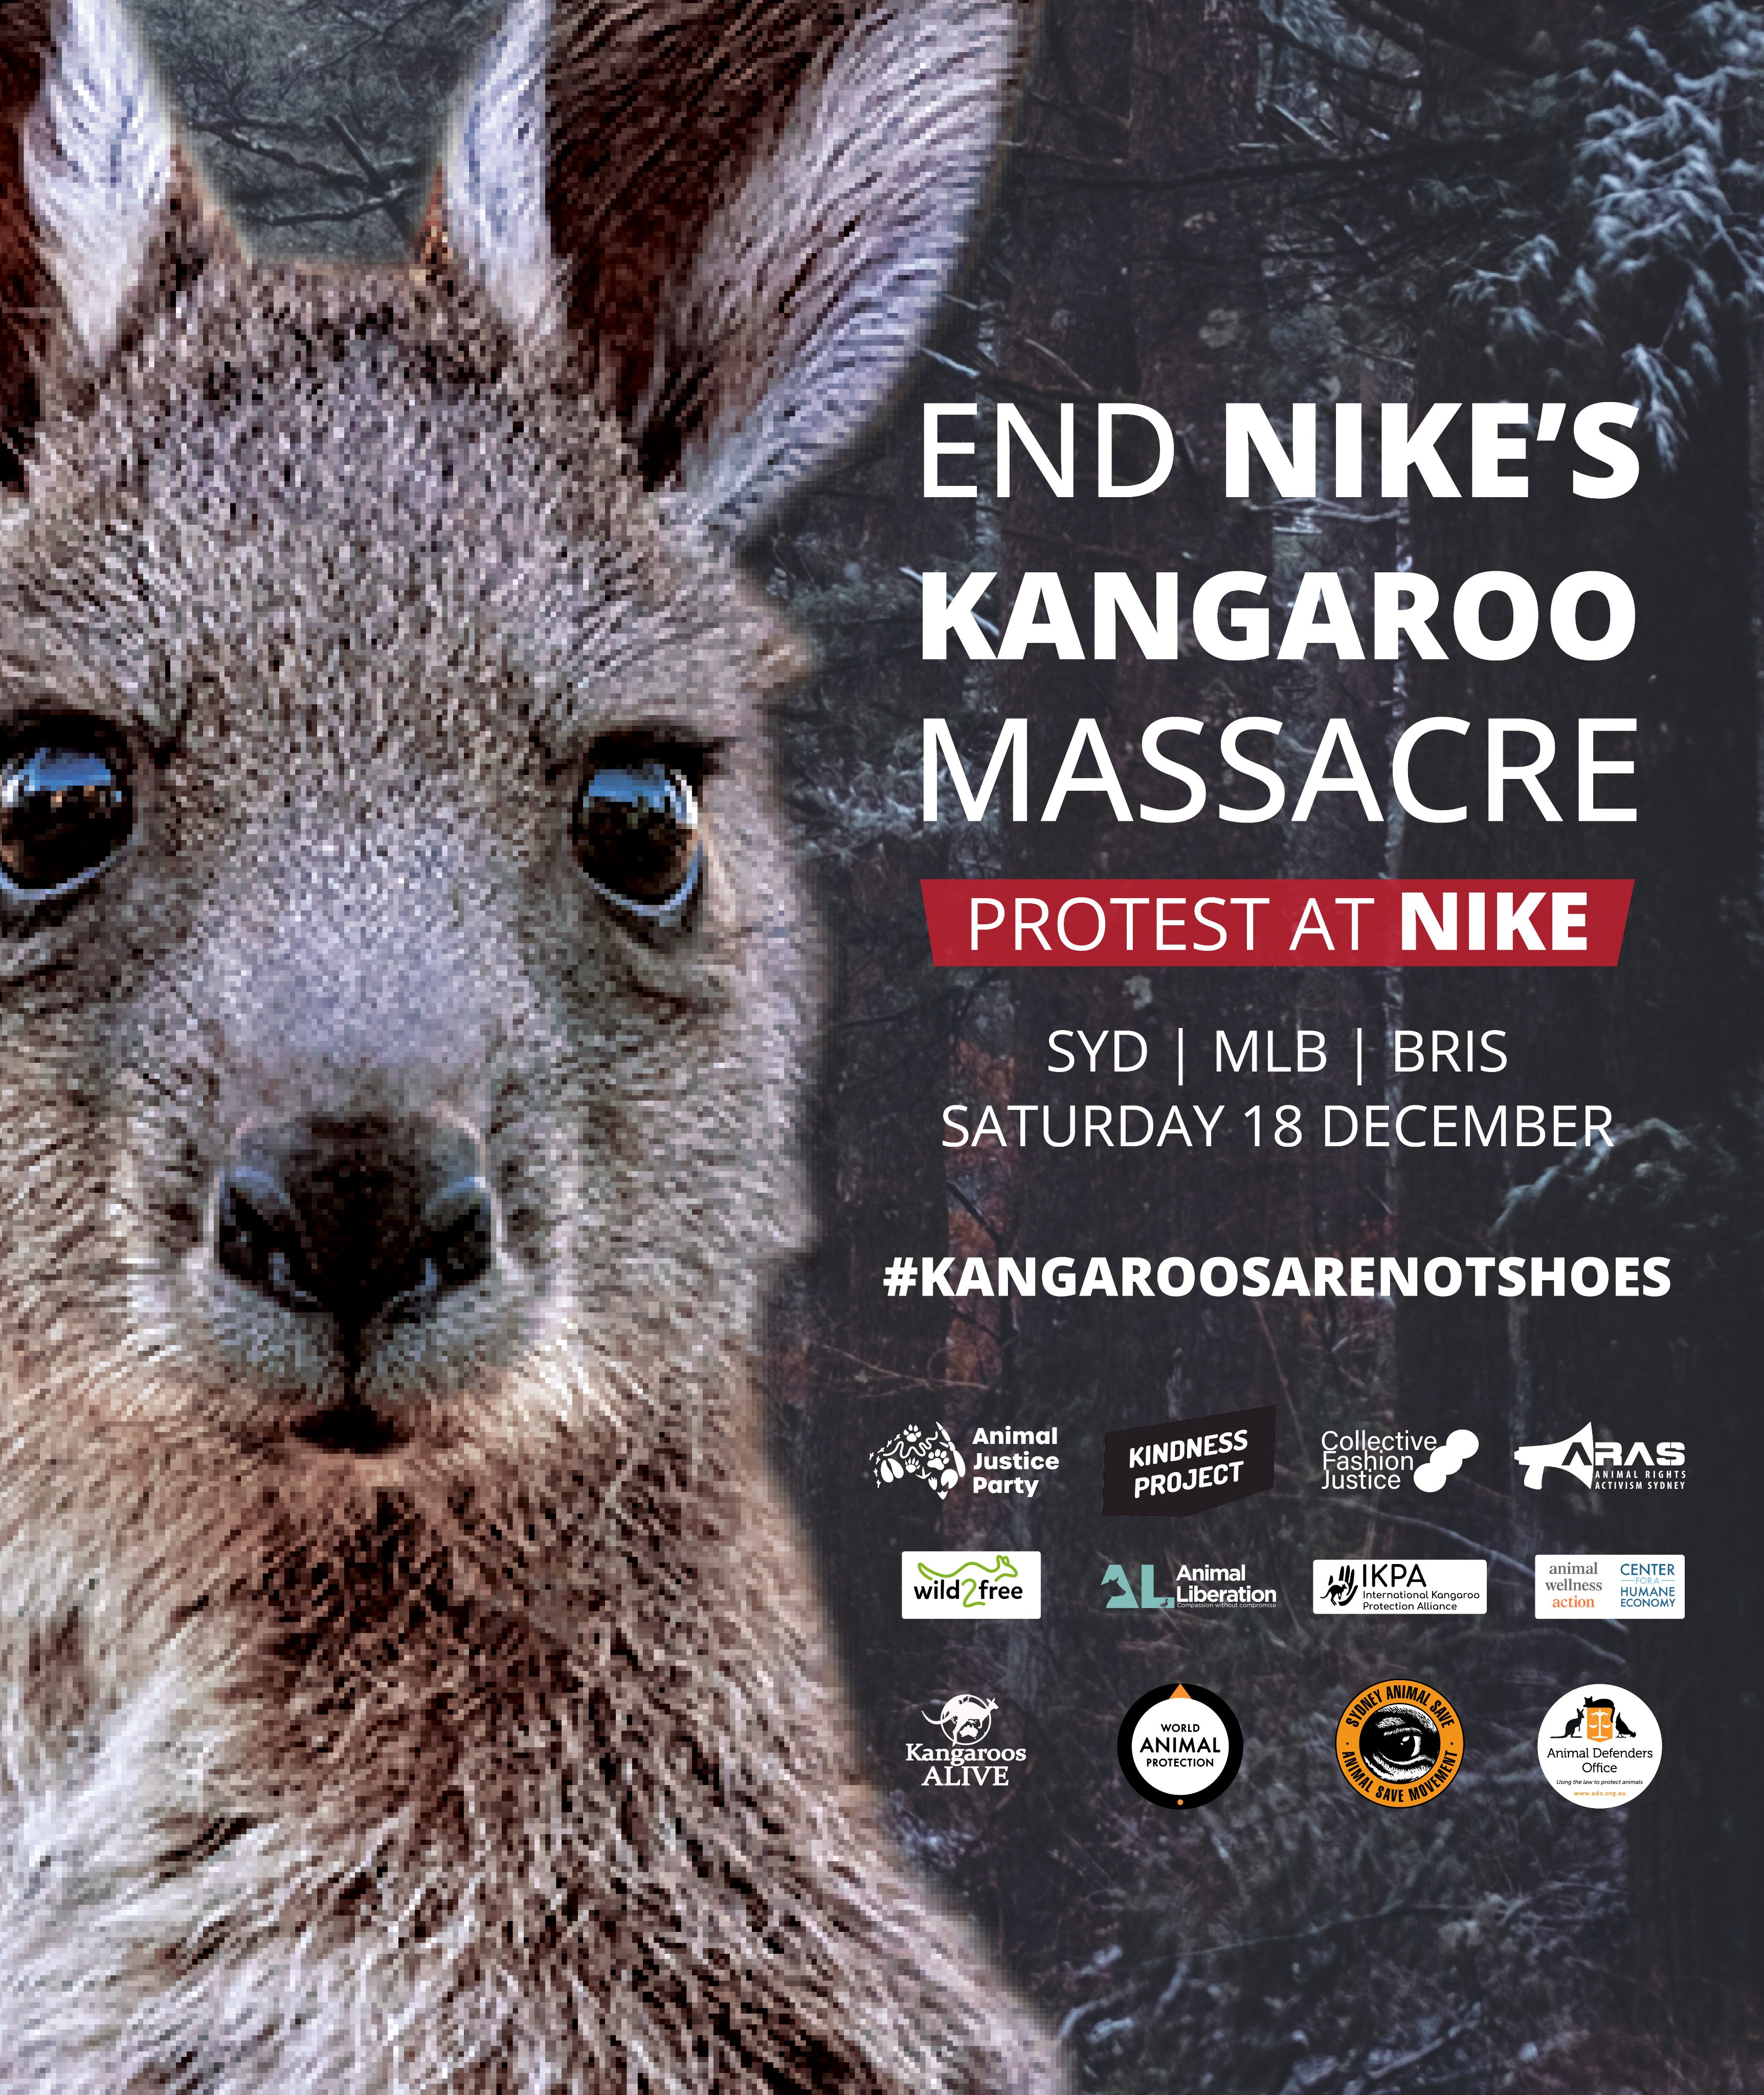 Animal Justice Party NSW on Twitter: "Protest at @Nike with us!⚡Their thirst for kangaroo leather is driving an unsustainable shooting across Australia. Join our MPs @MlcHurst and @MarkPearsonMP at NIKE Flagship